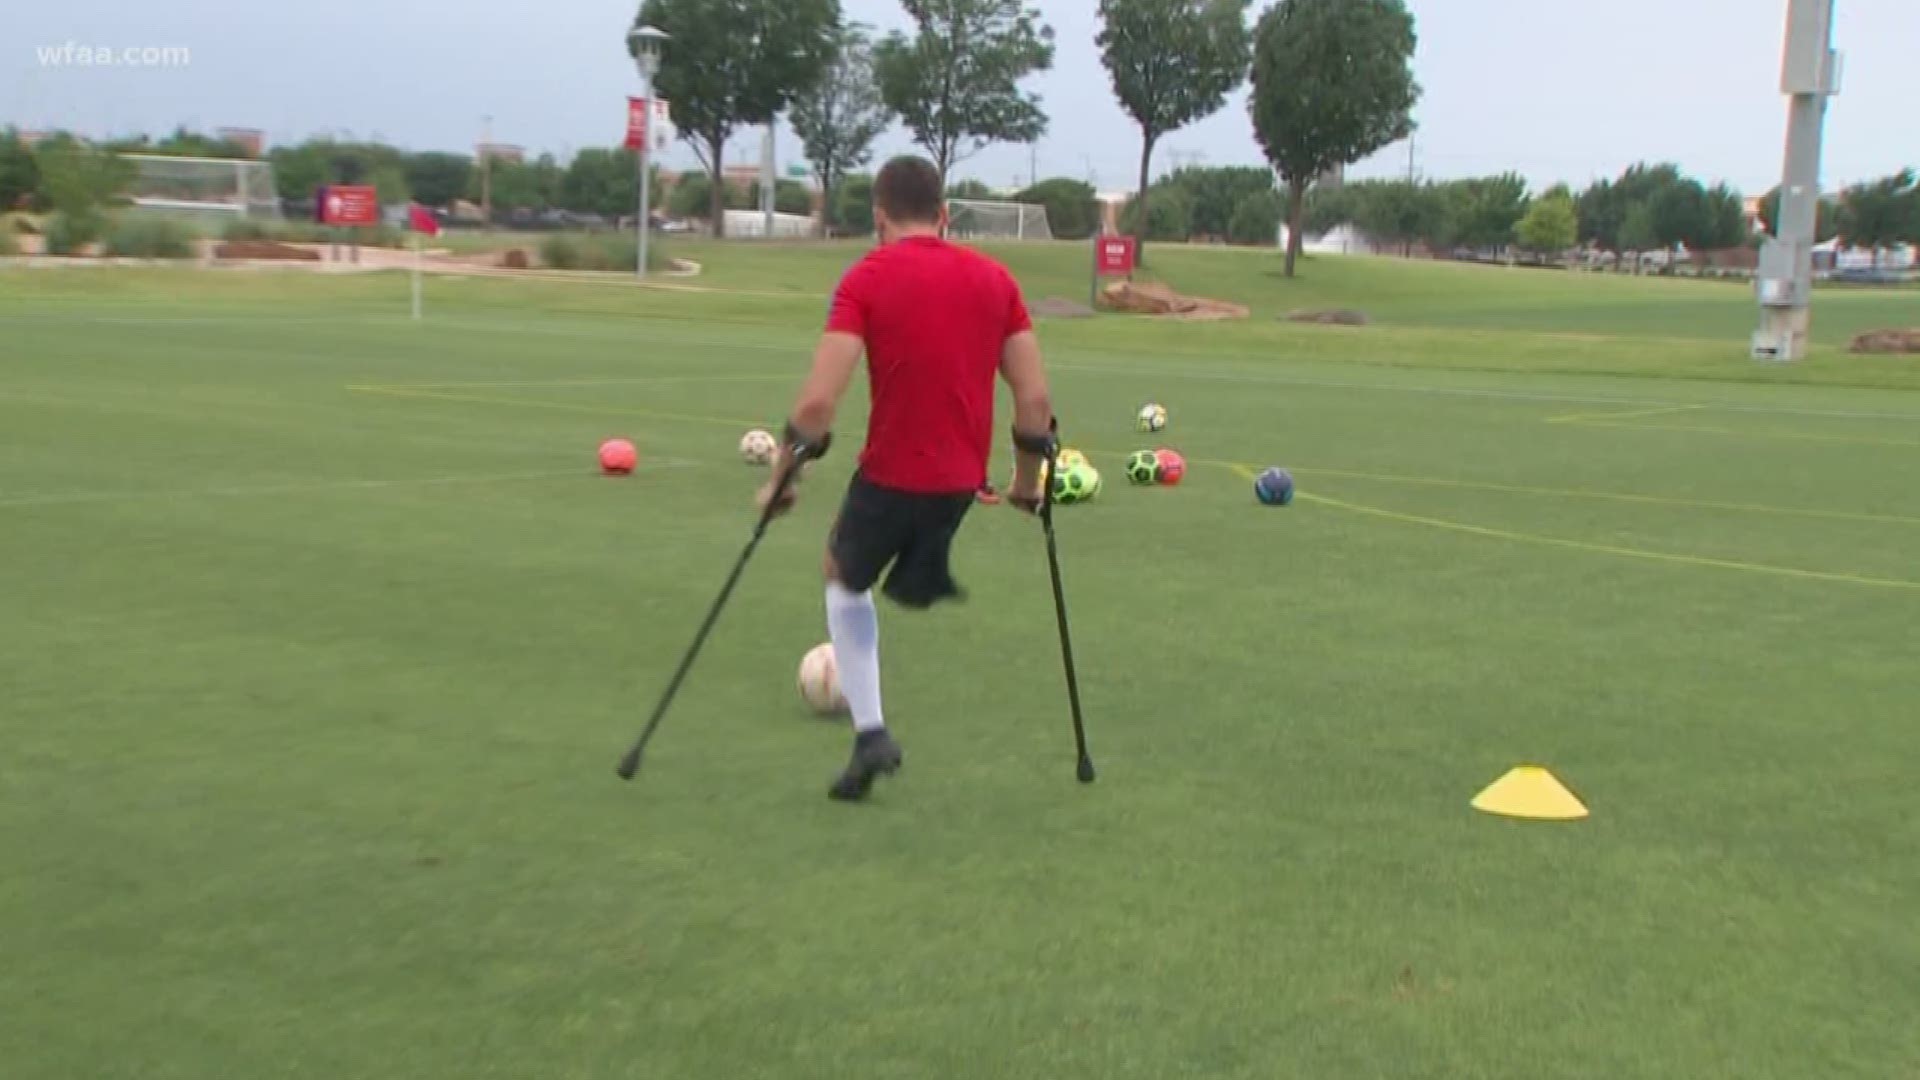 FC Dallas hosts training sessions for the United State's Men's National Amputee Team.